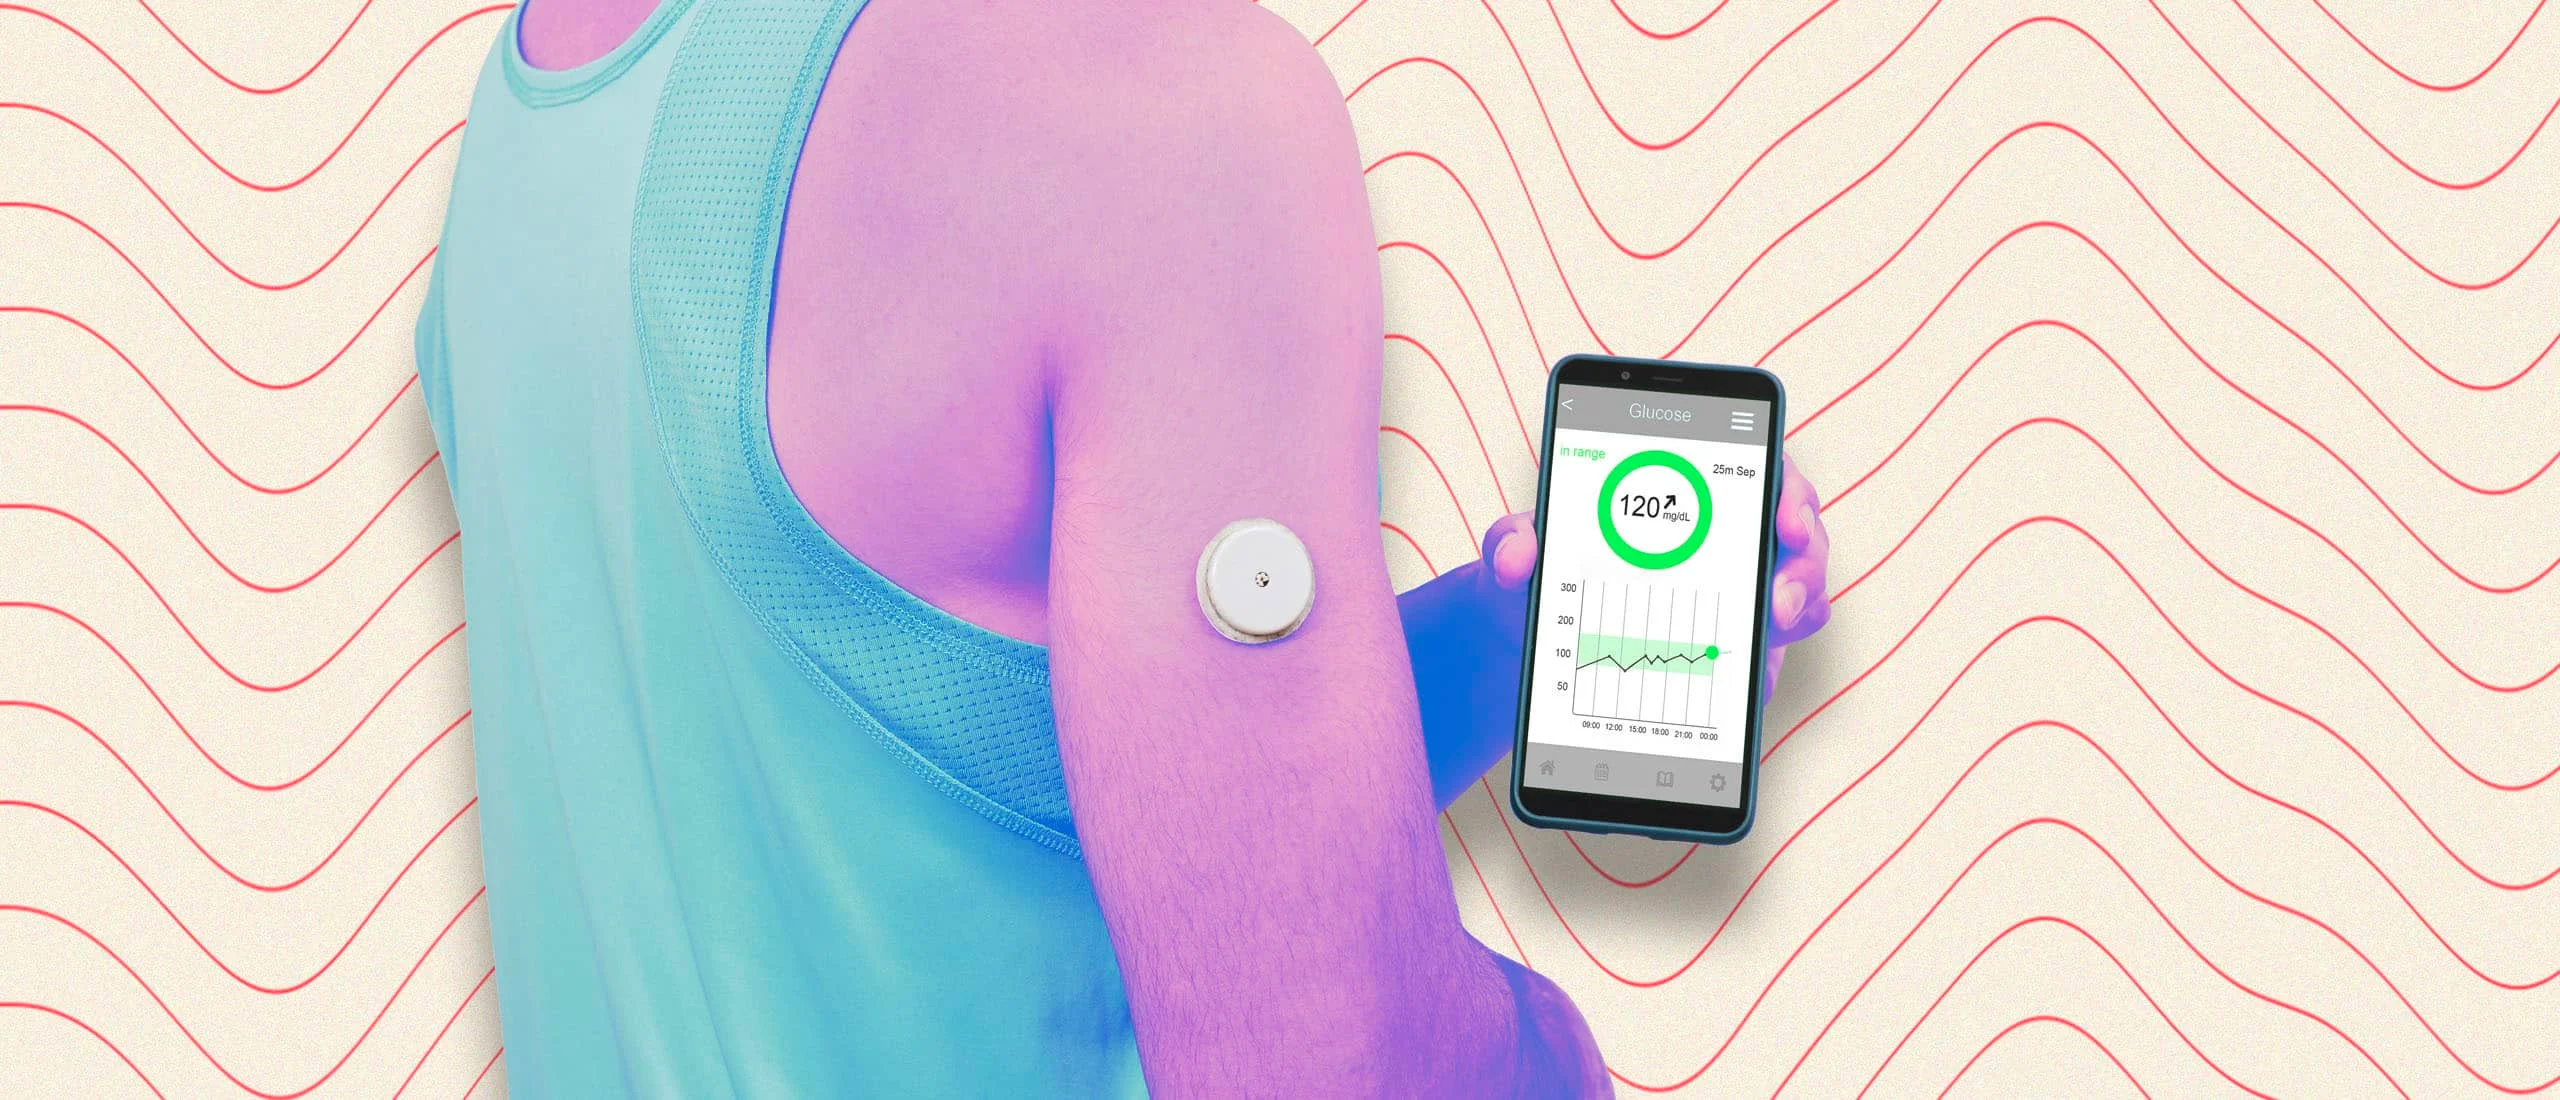 man wearing a continuous glucose monitor on his arm and holding his phone which shows his real time blood glucose level.